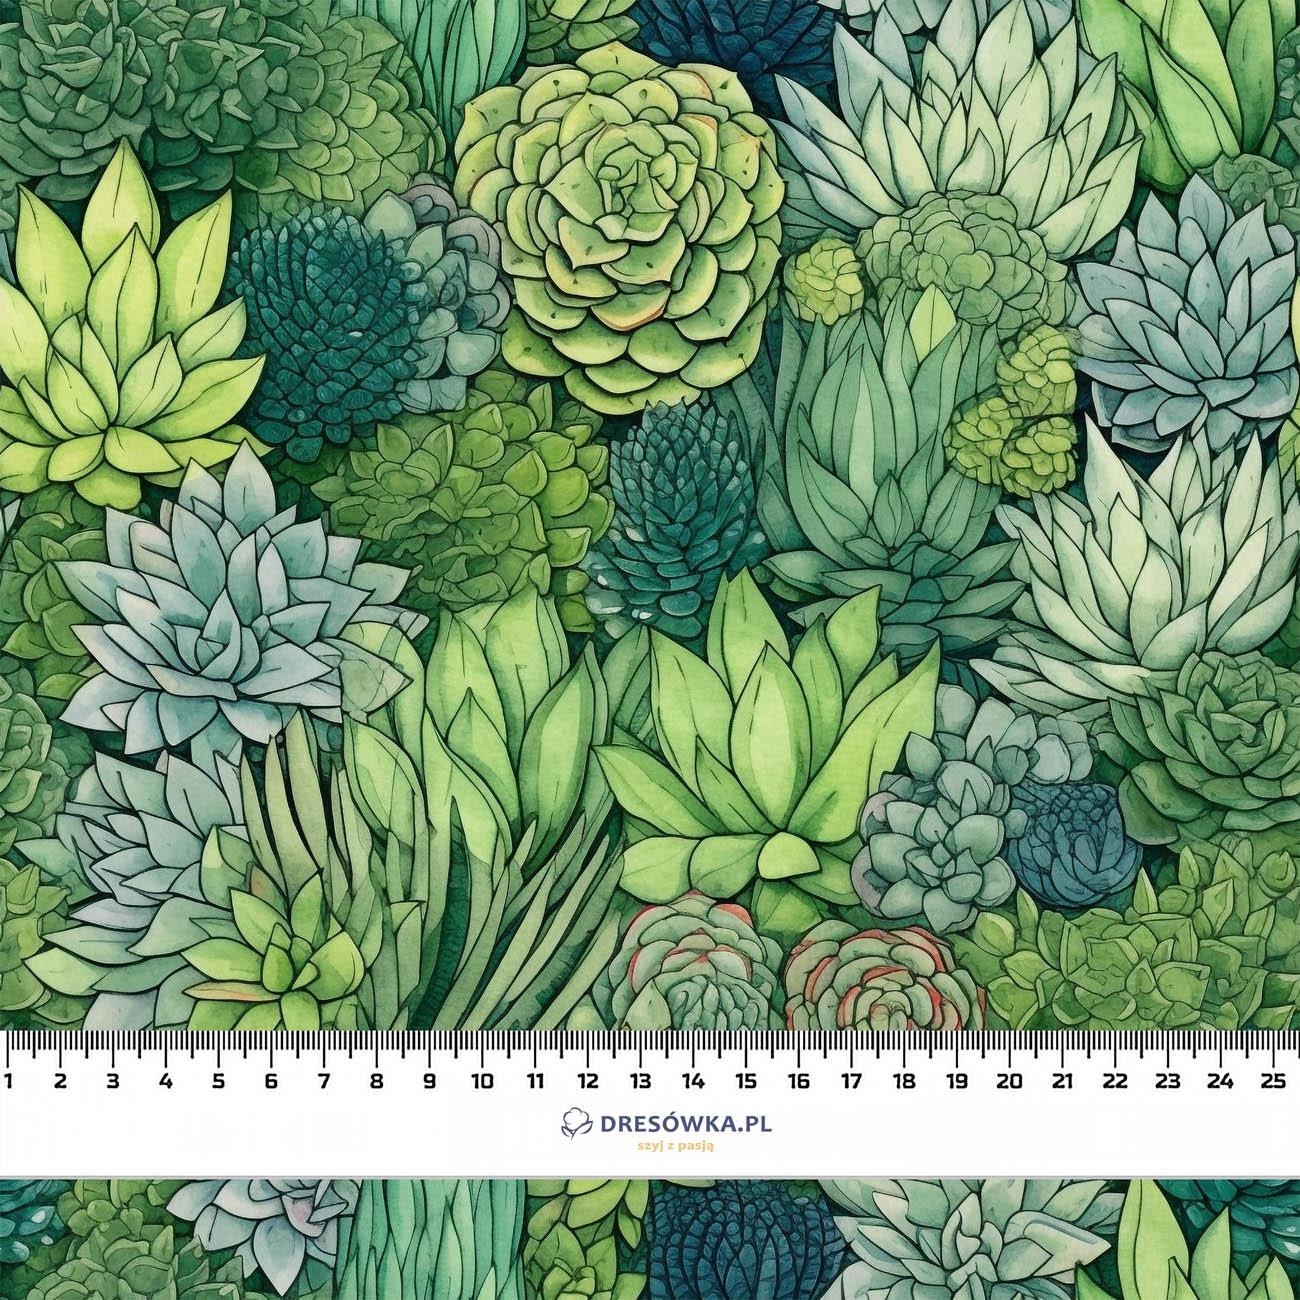 SUCCULENT PLANTS PAT. 5 - quick-drying woven fabric